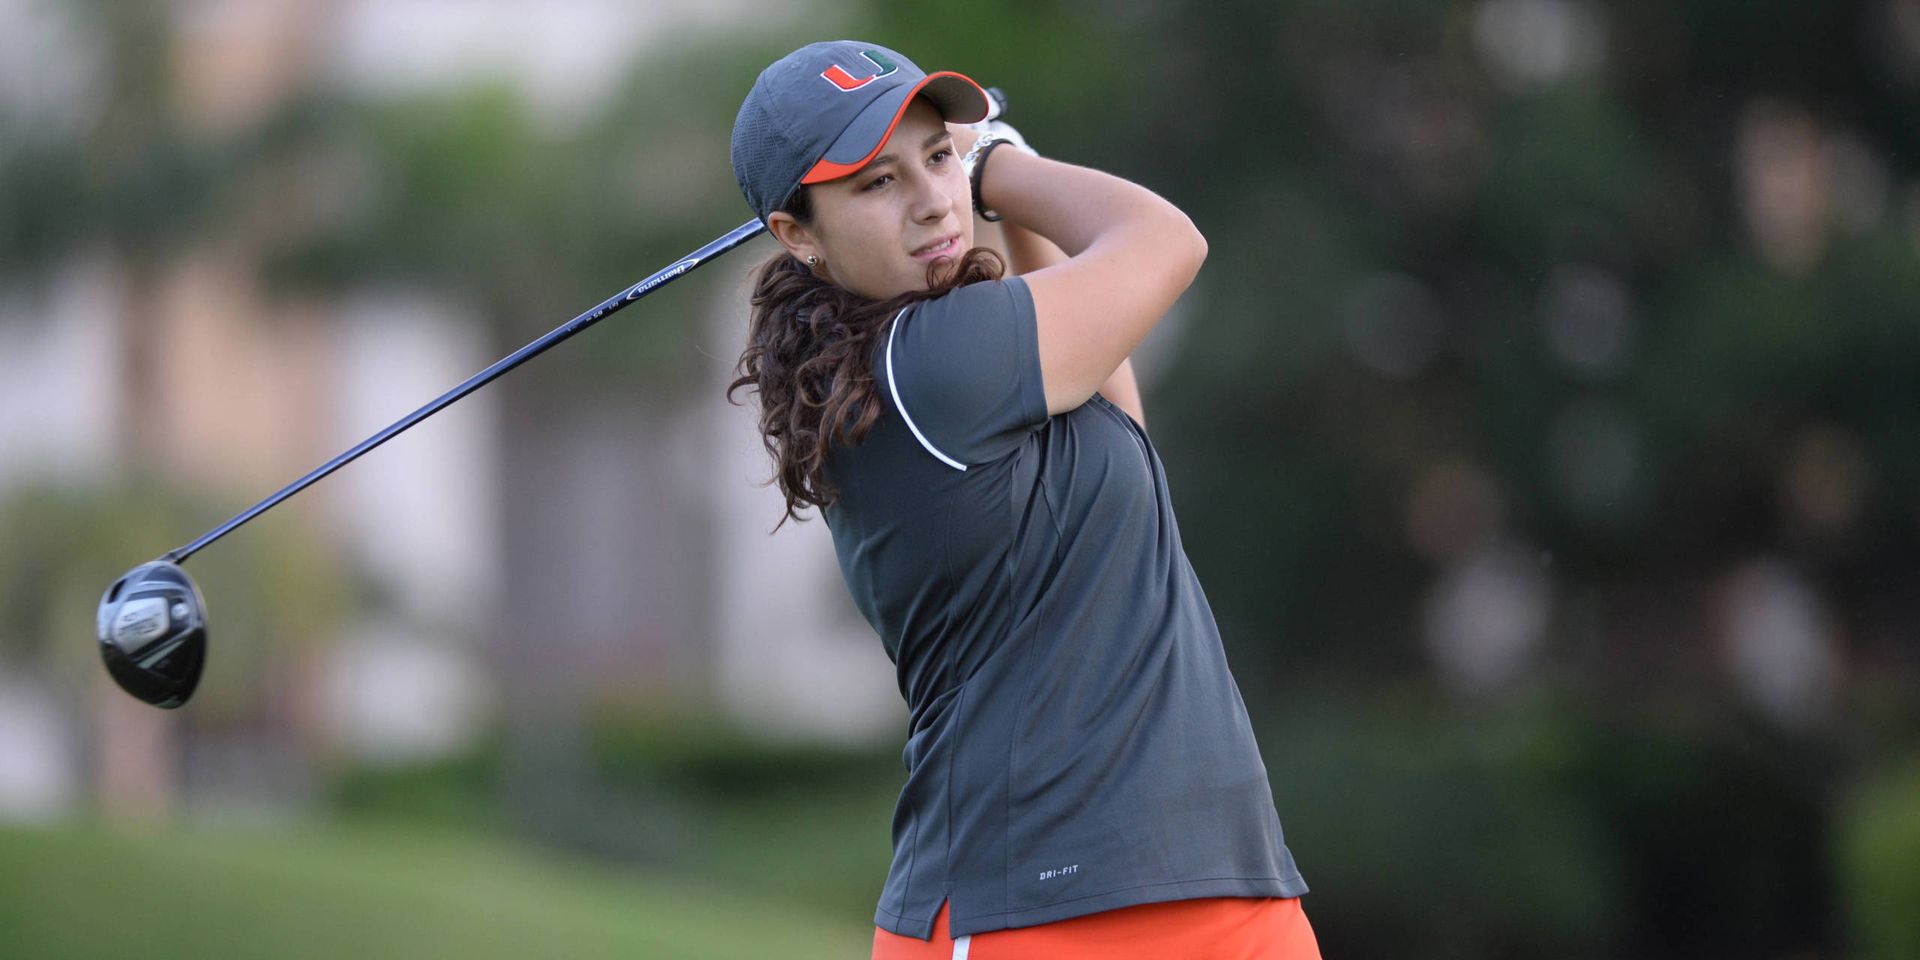 Canes Finish In Fifth At Betsy Rawls